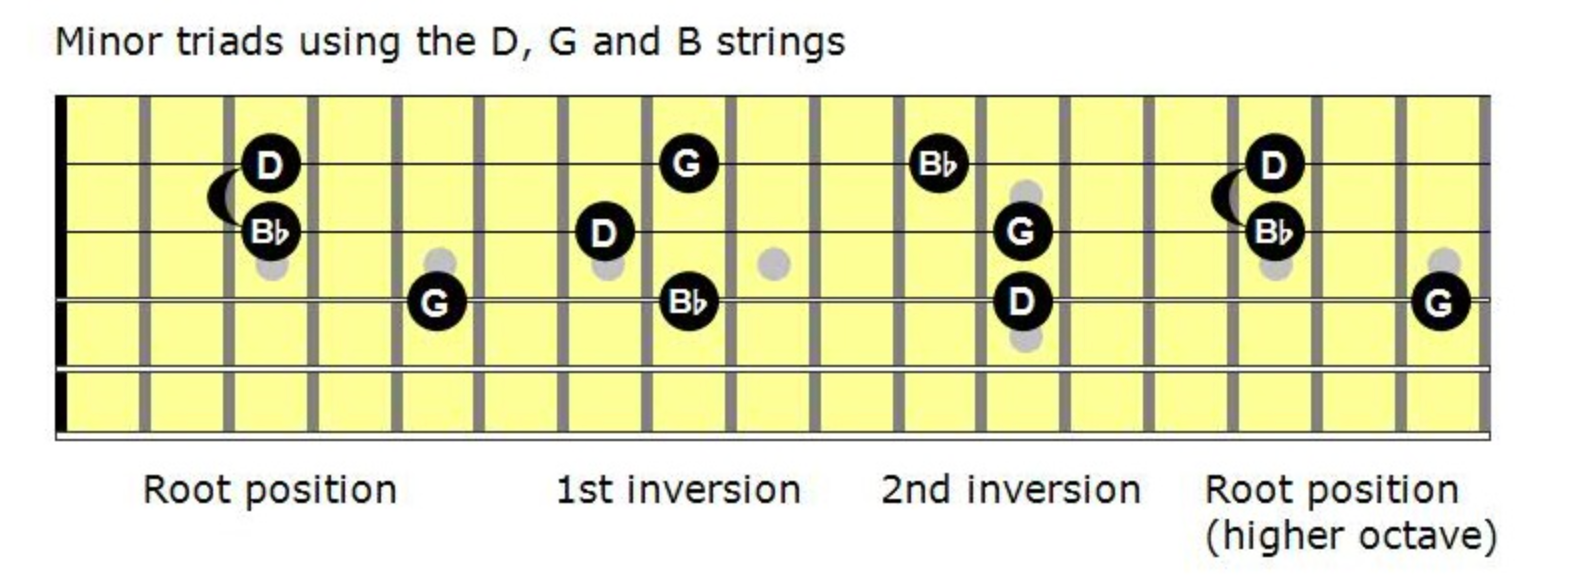 Minor Triad: all inversions on D, G, and B strings